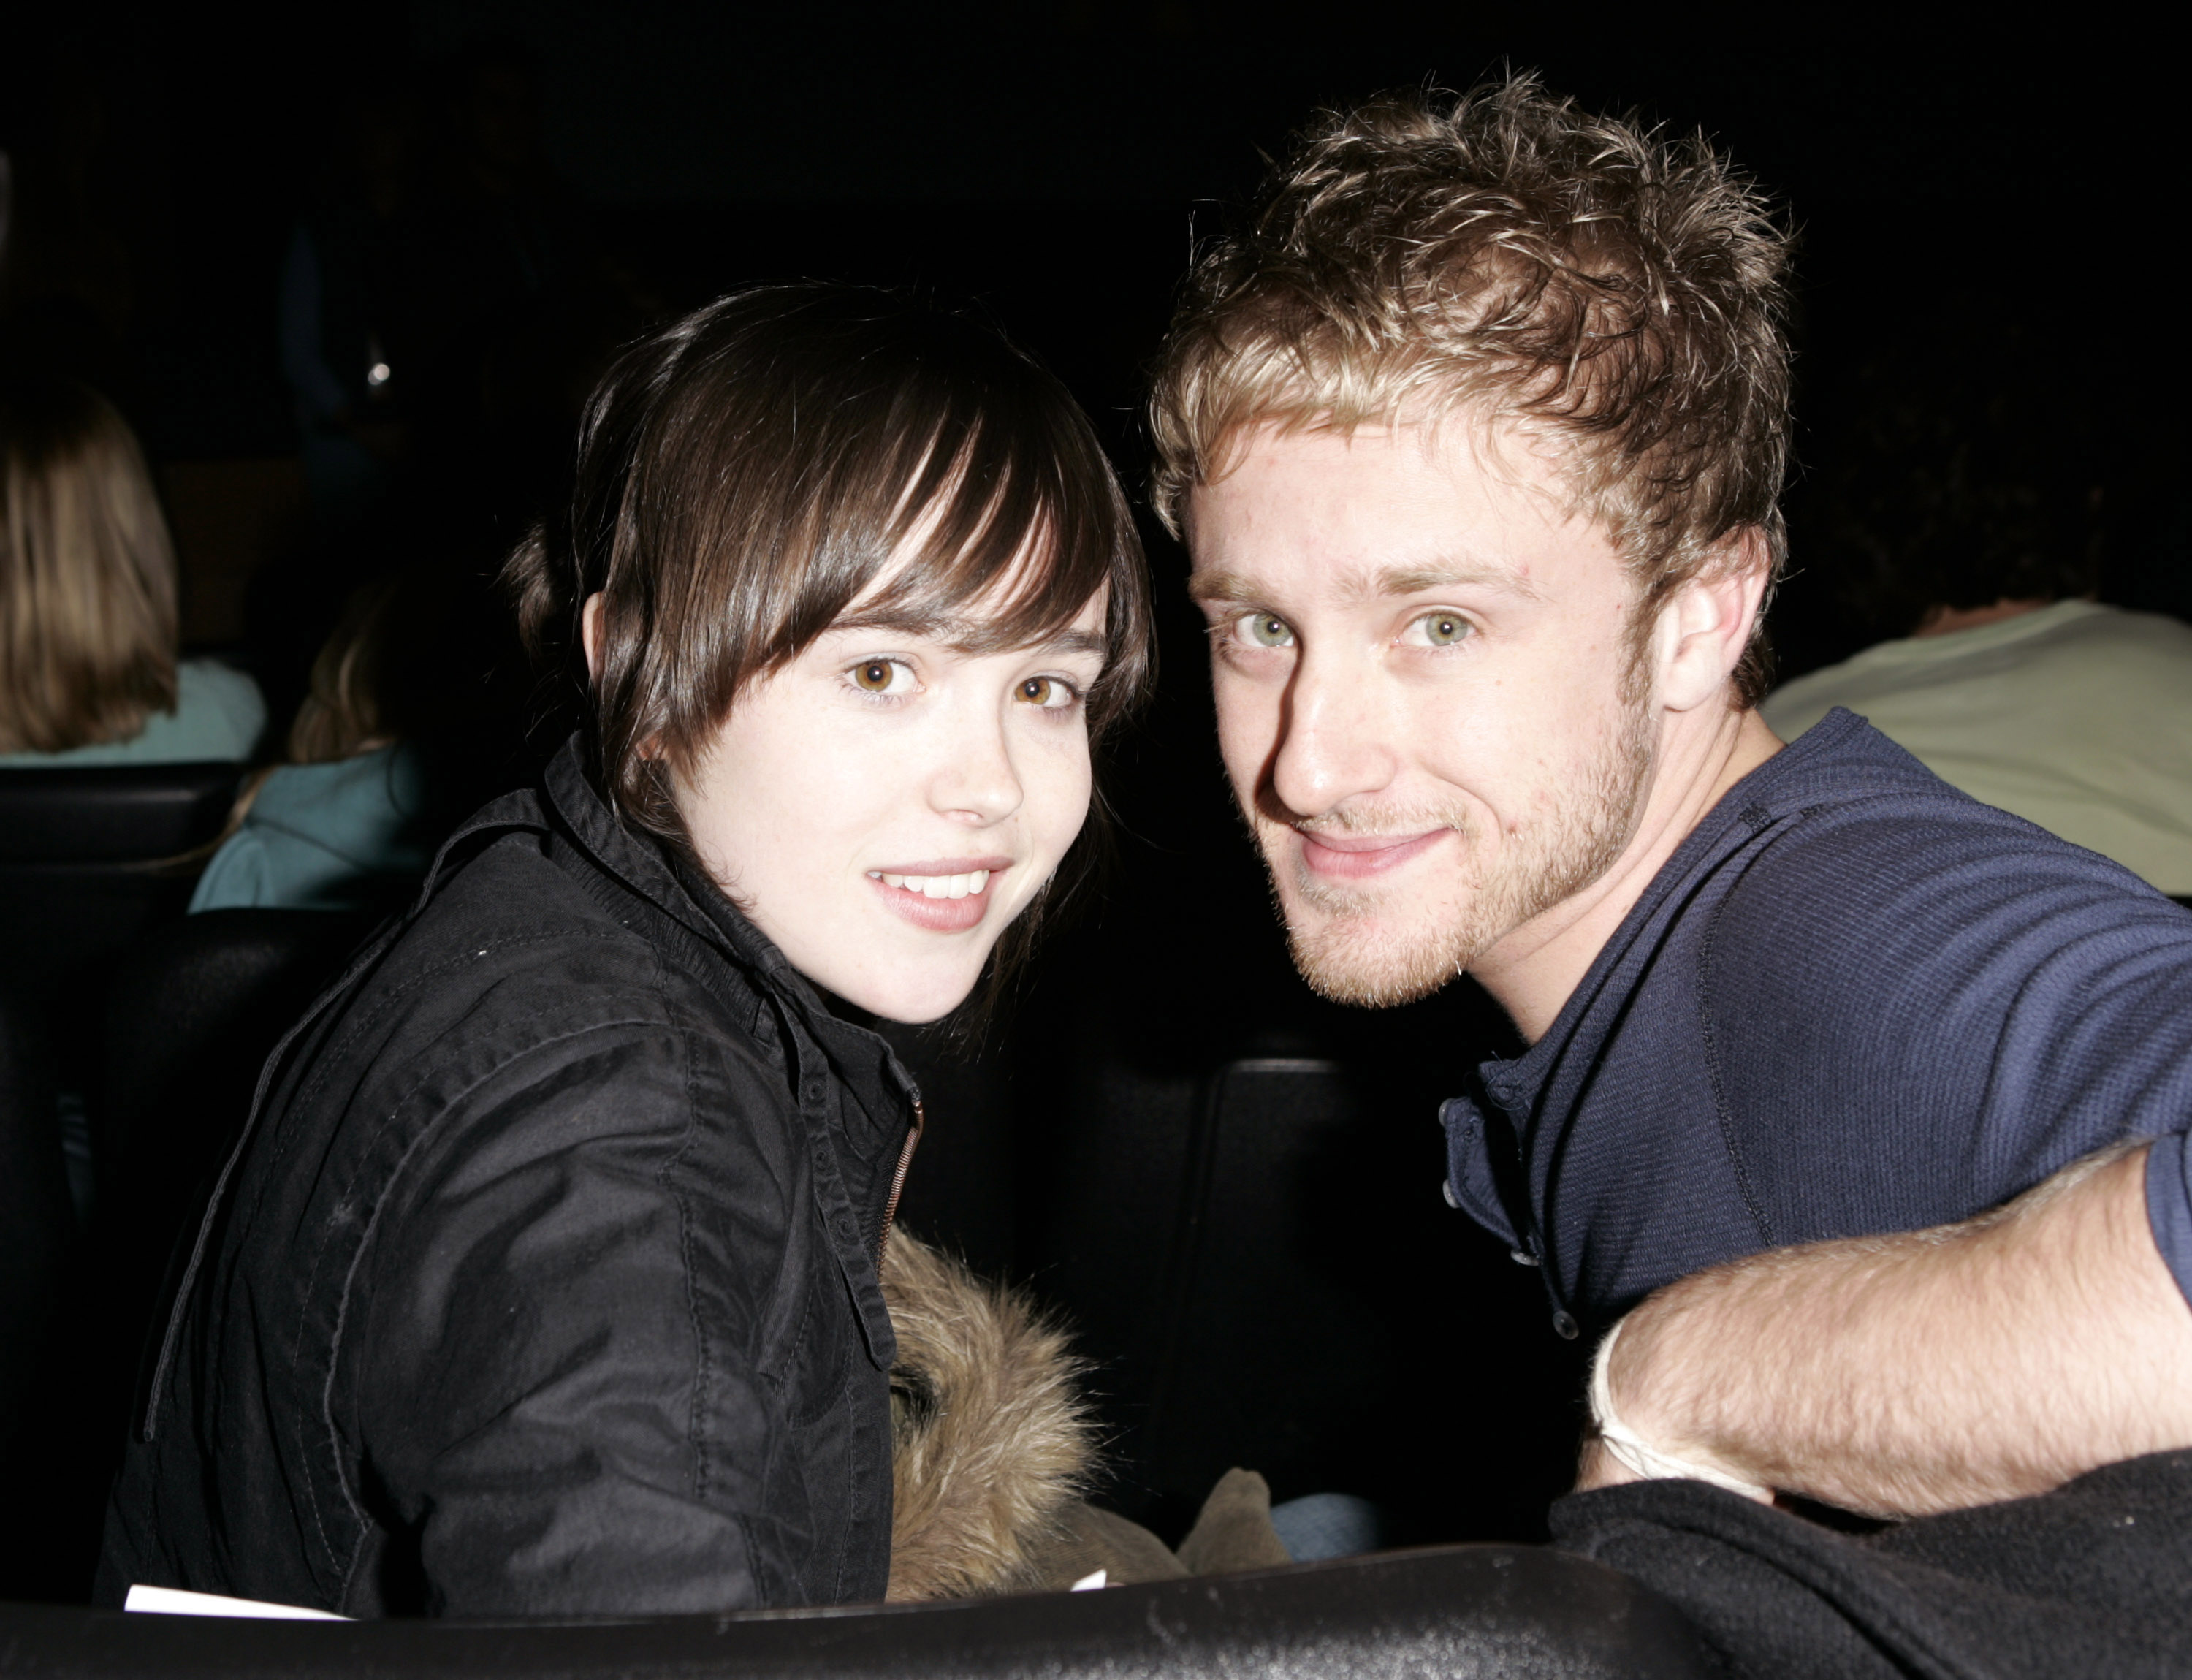 Elliot Page and Ben Foster at the "Alpha Dog" Premiere at 2006 Sundance Film Festival on January 27, 2006. | Source: Getty Images